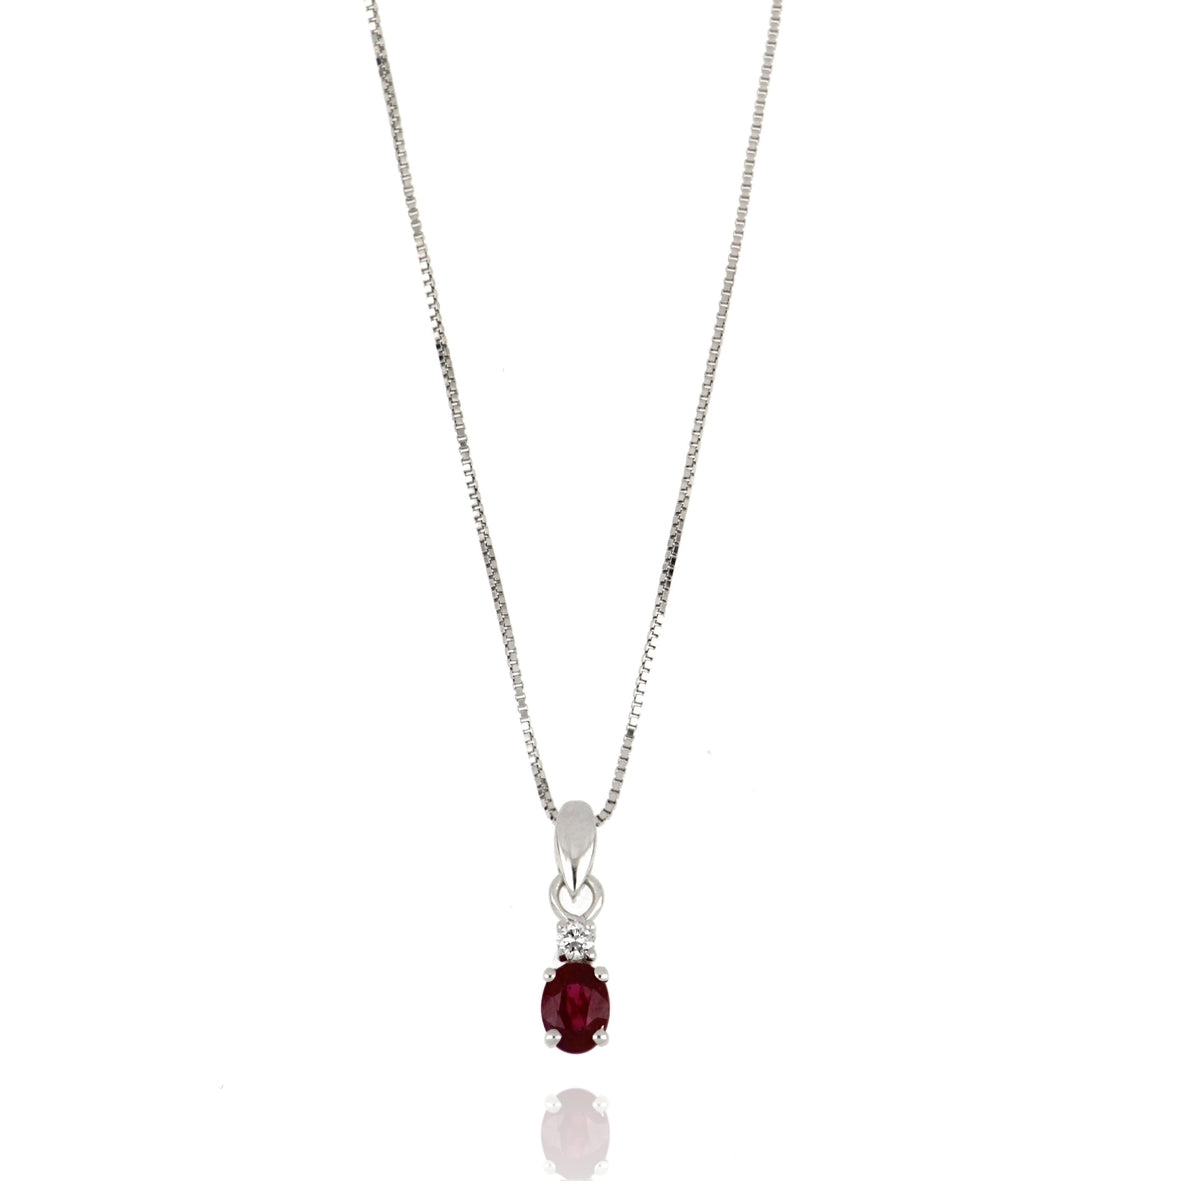 Necklace With Diamond And Ruby Pendant